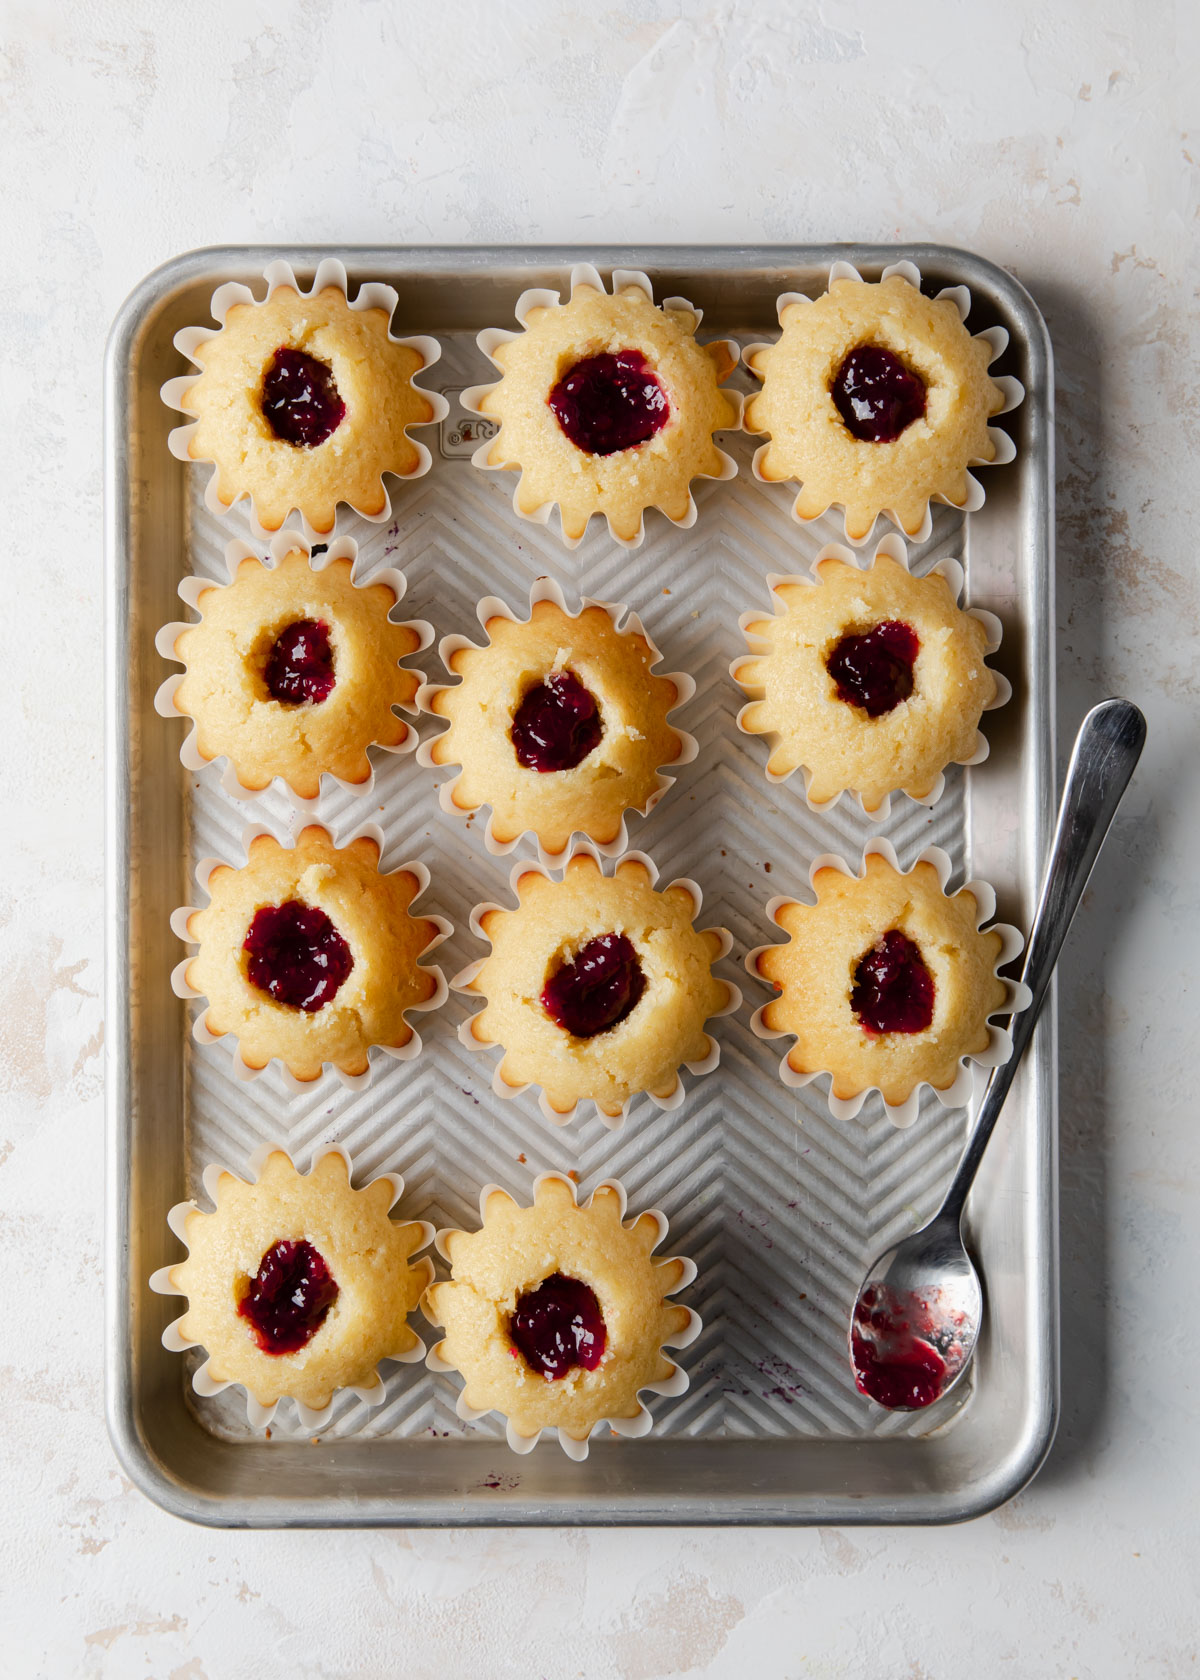 Cupcakes filled with raspberry jam on a baking sheet